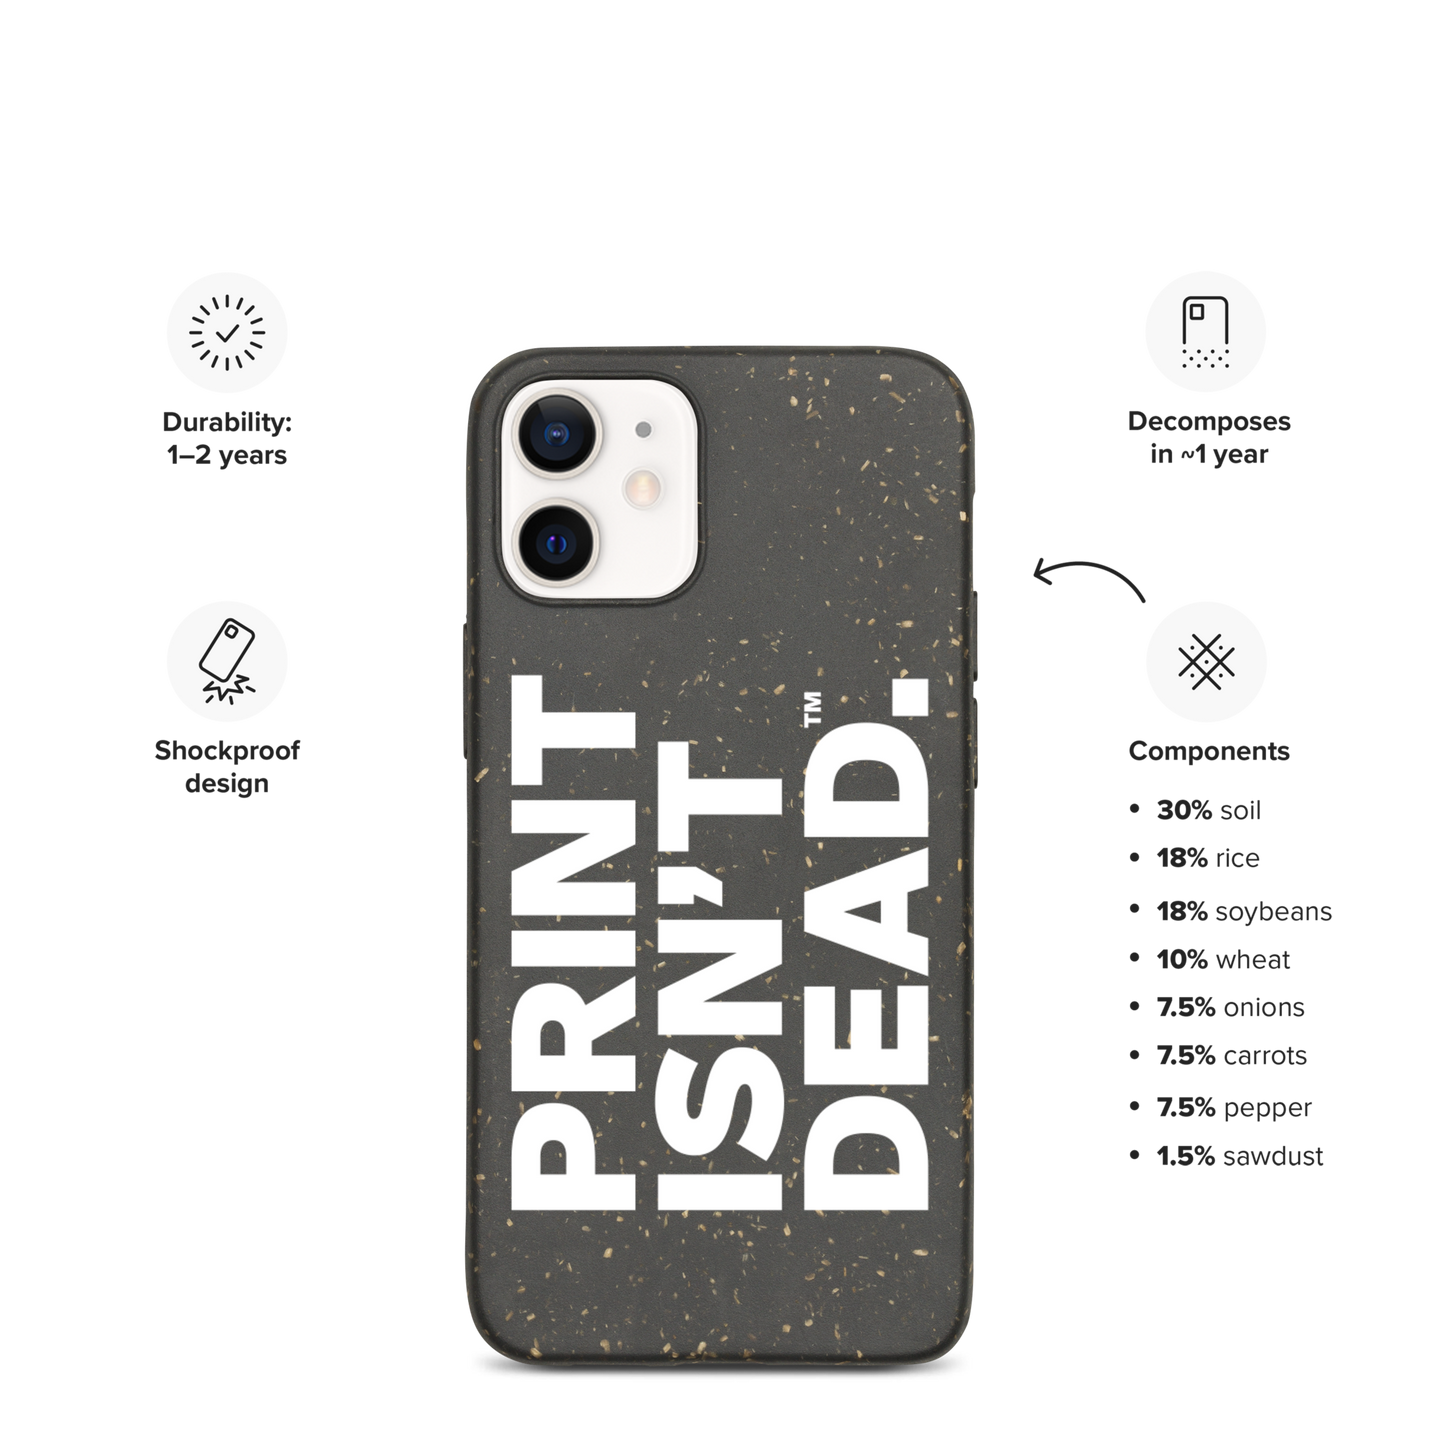 Print Isn't Dead: Speckled iPhone Case